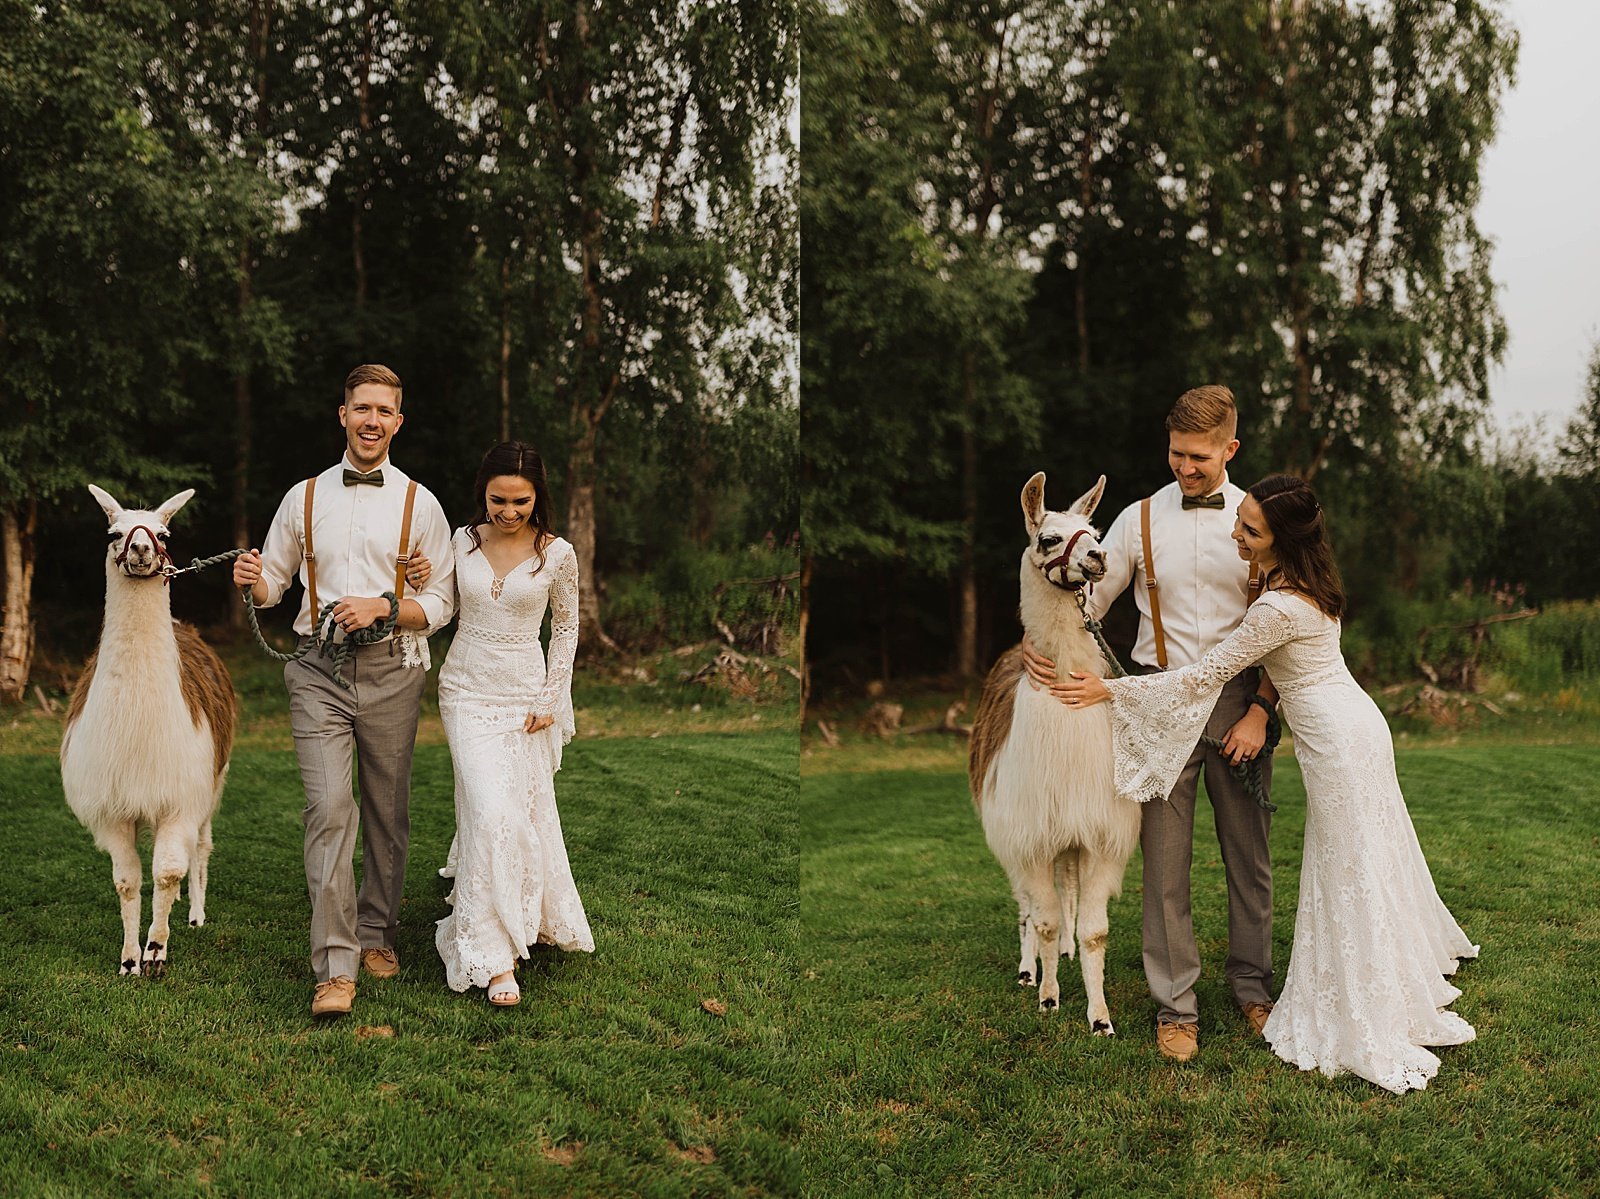  Bride and groom walking in a field with animals for their day-after llama session 